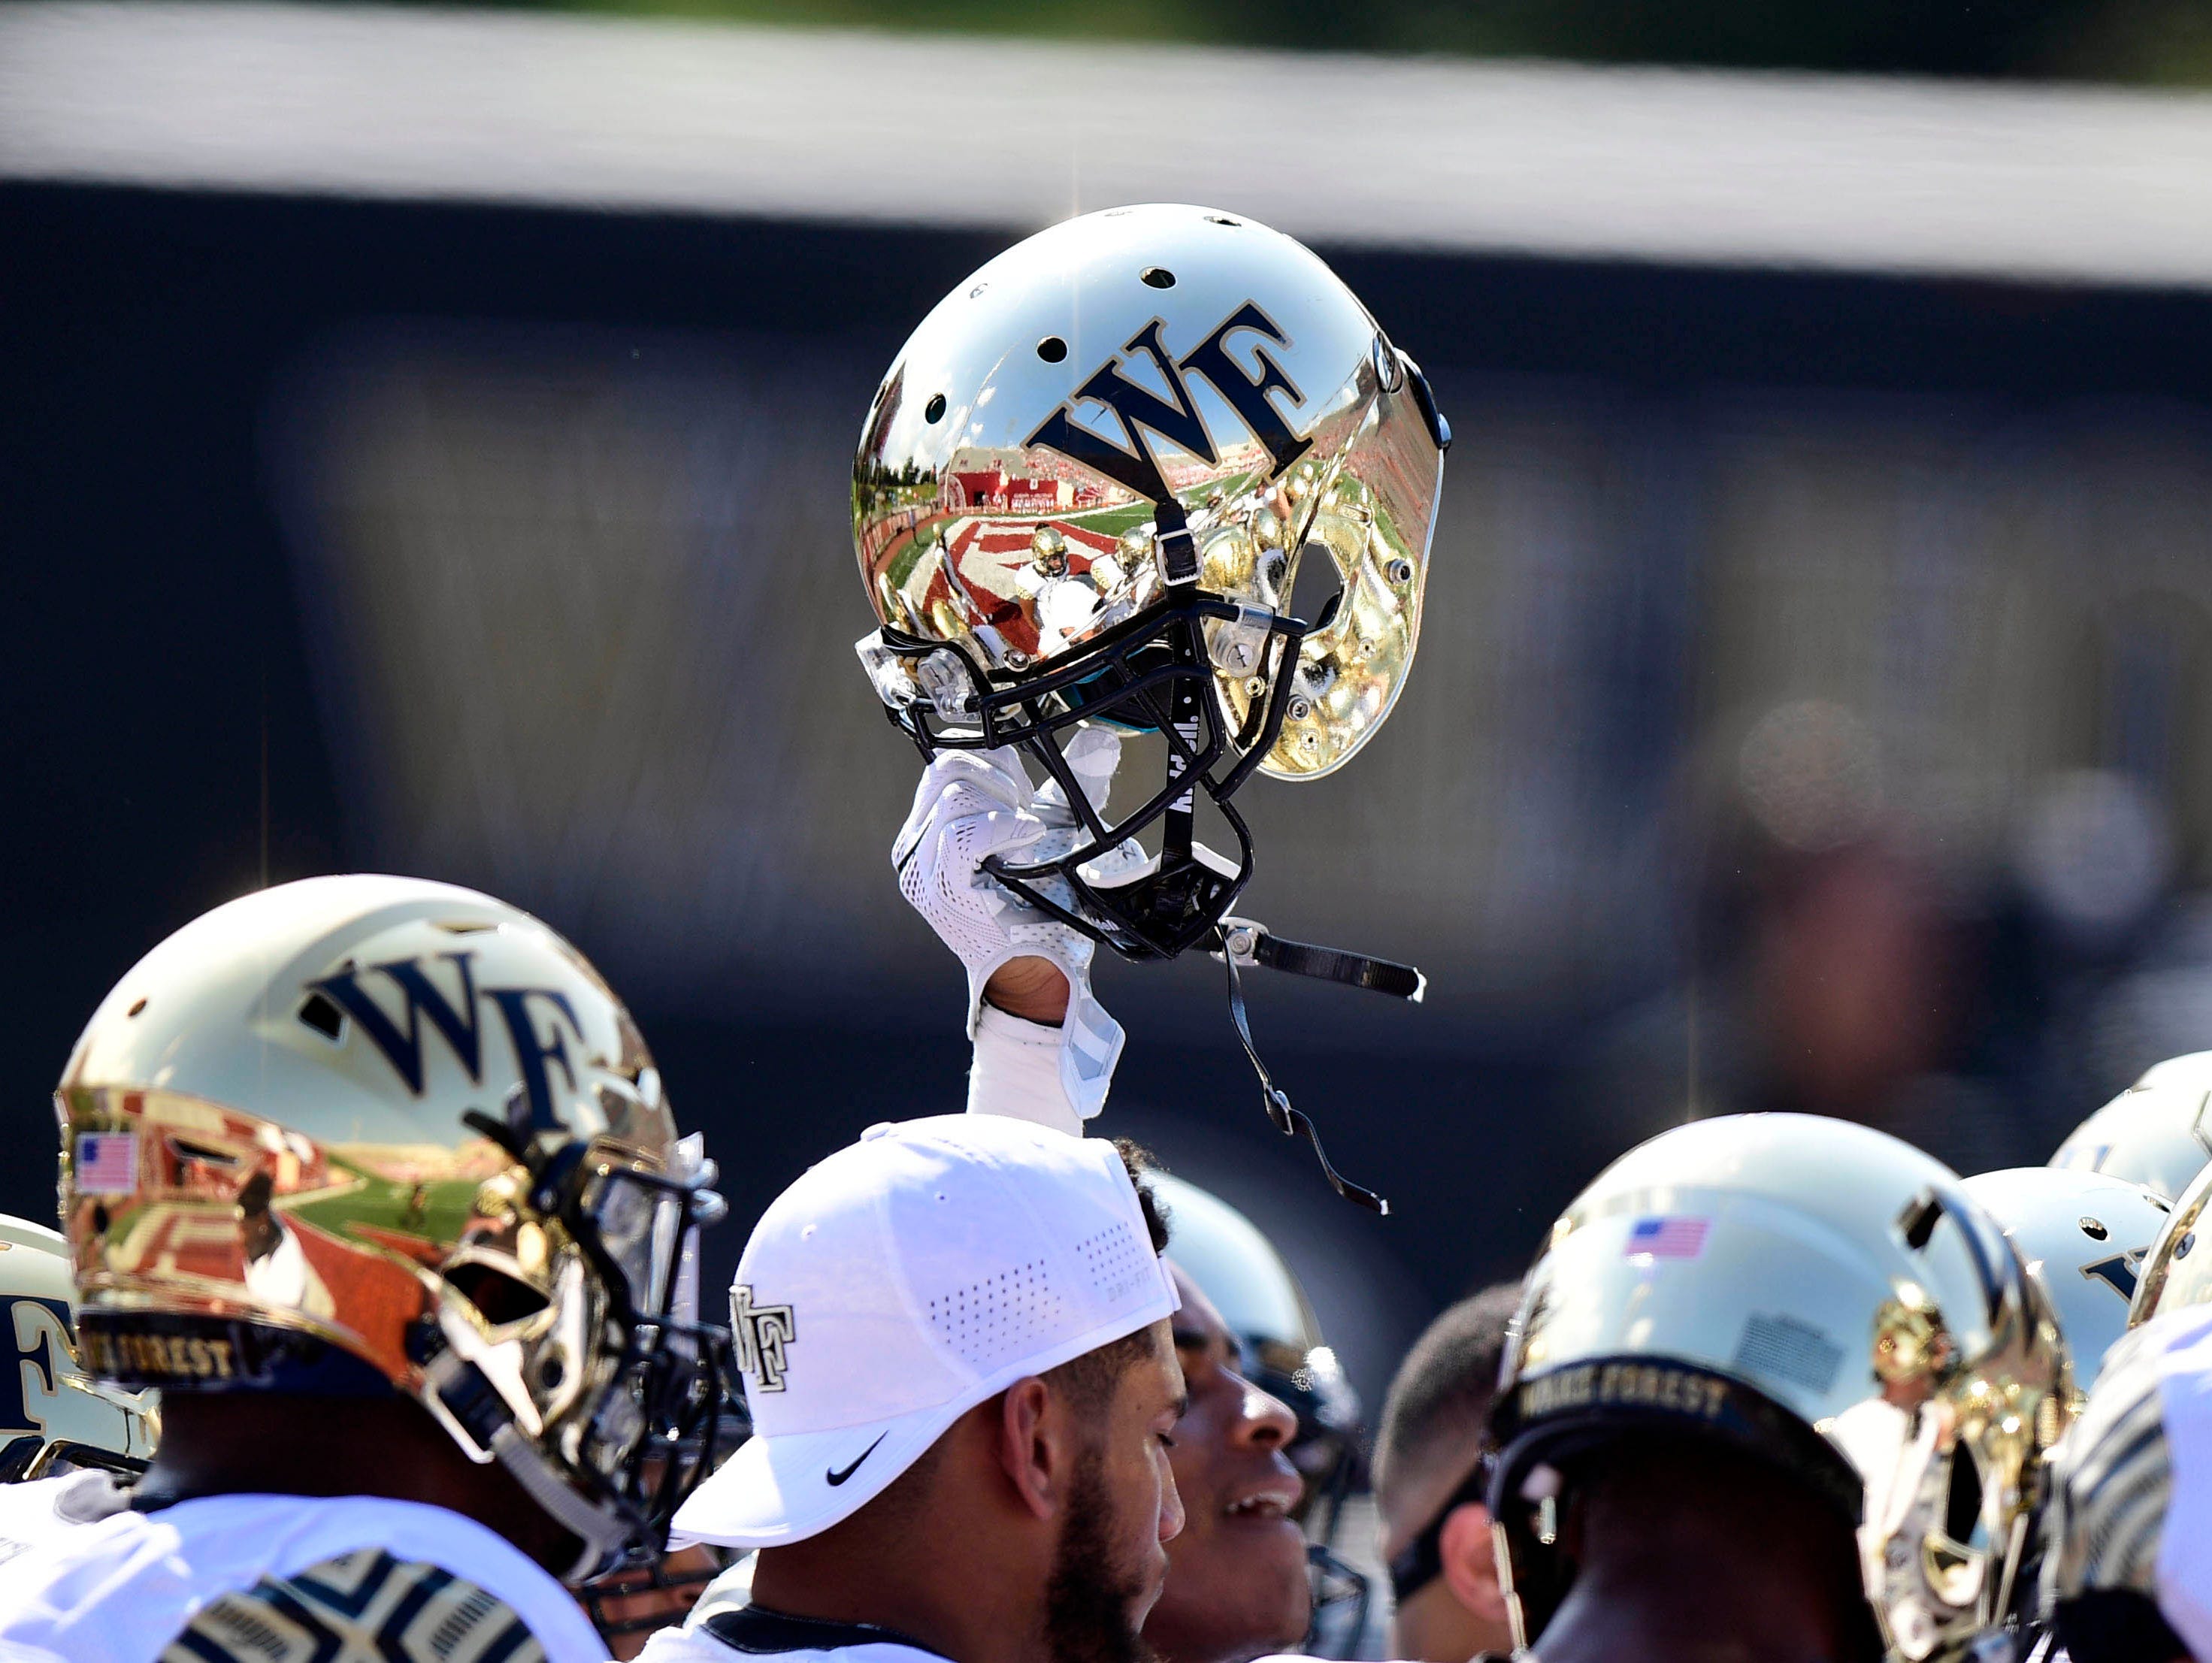 Memorial Stadium reflects in the helmet of a Wake Forest Demon Deacons.